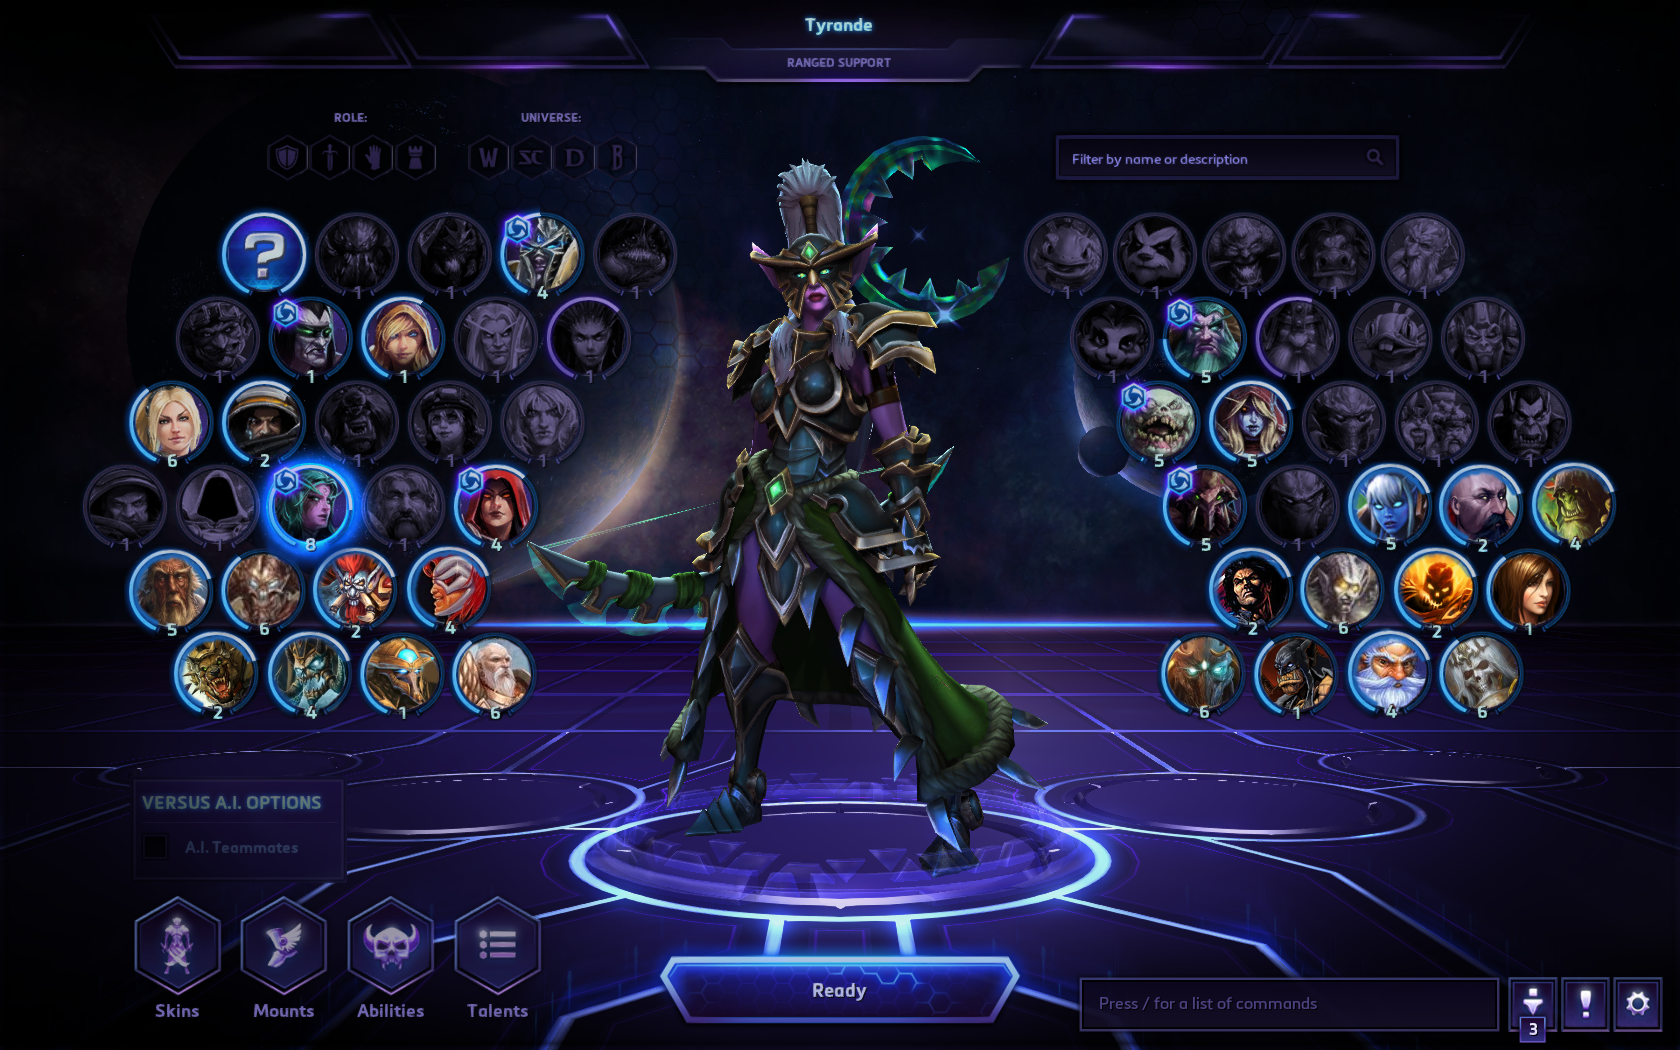 Group picture - Heroes to scale - update : r/heroesofthestorm